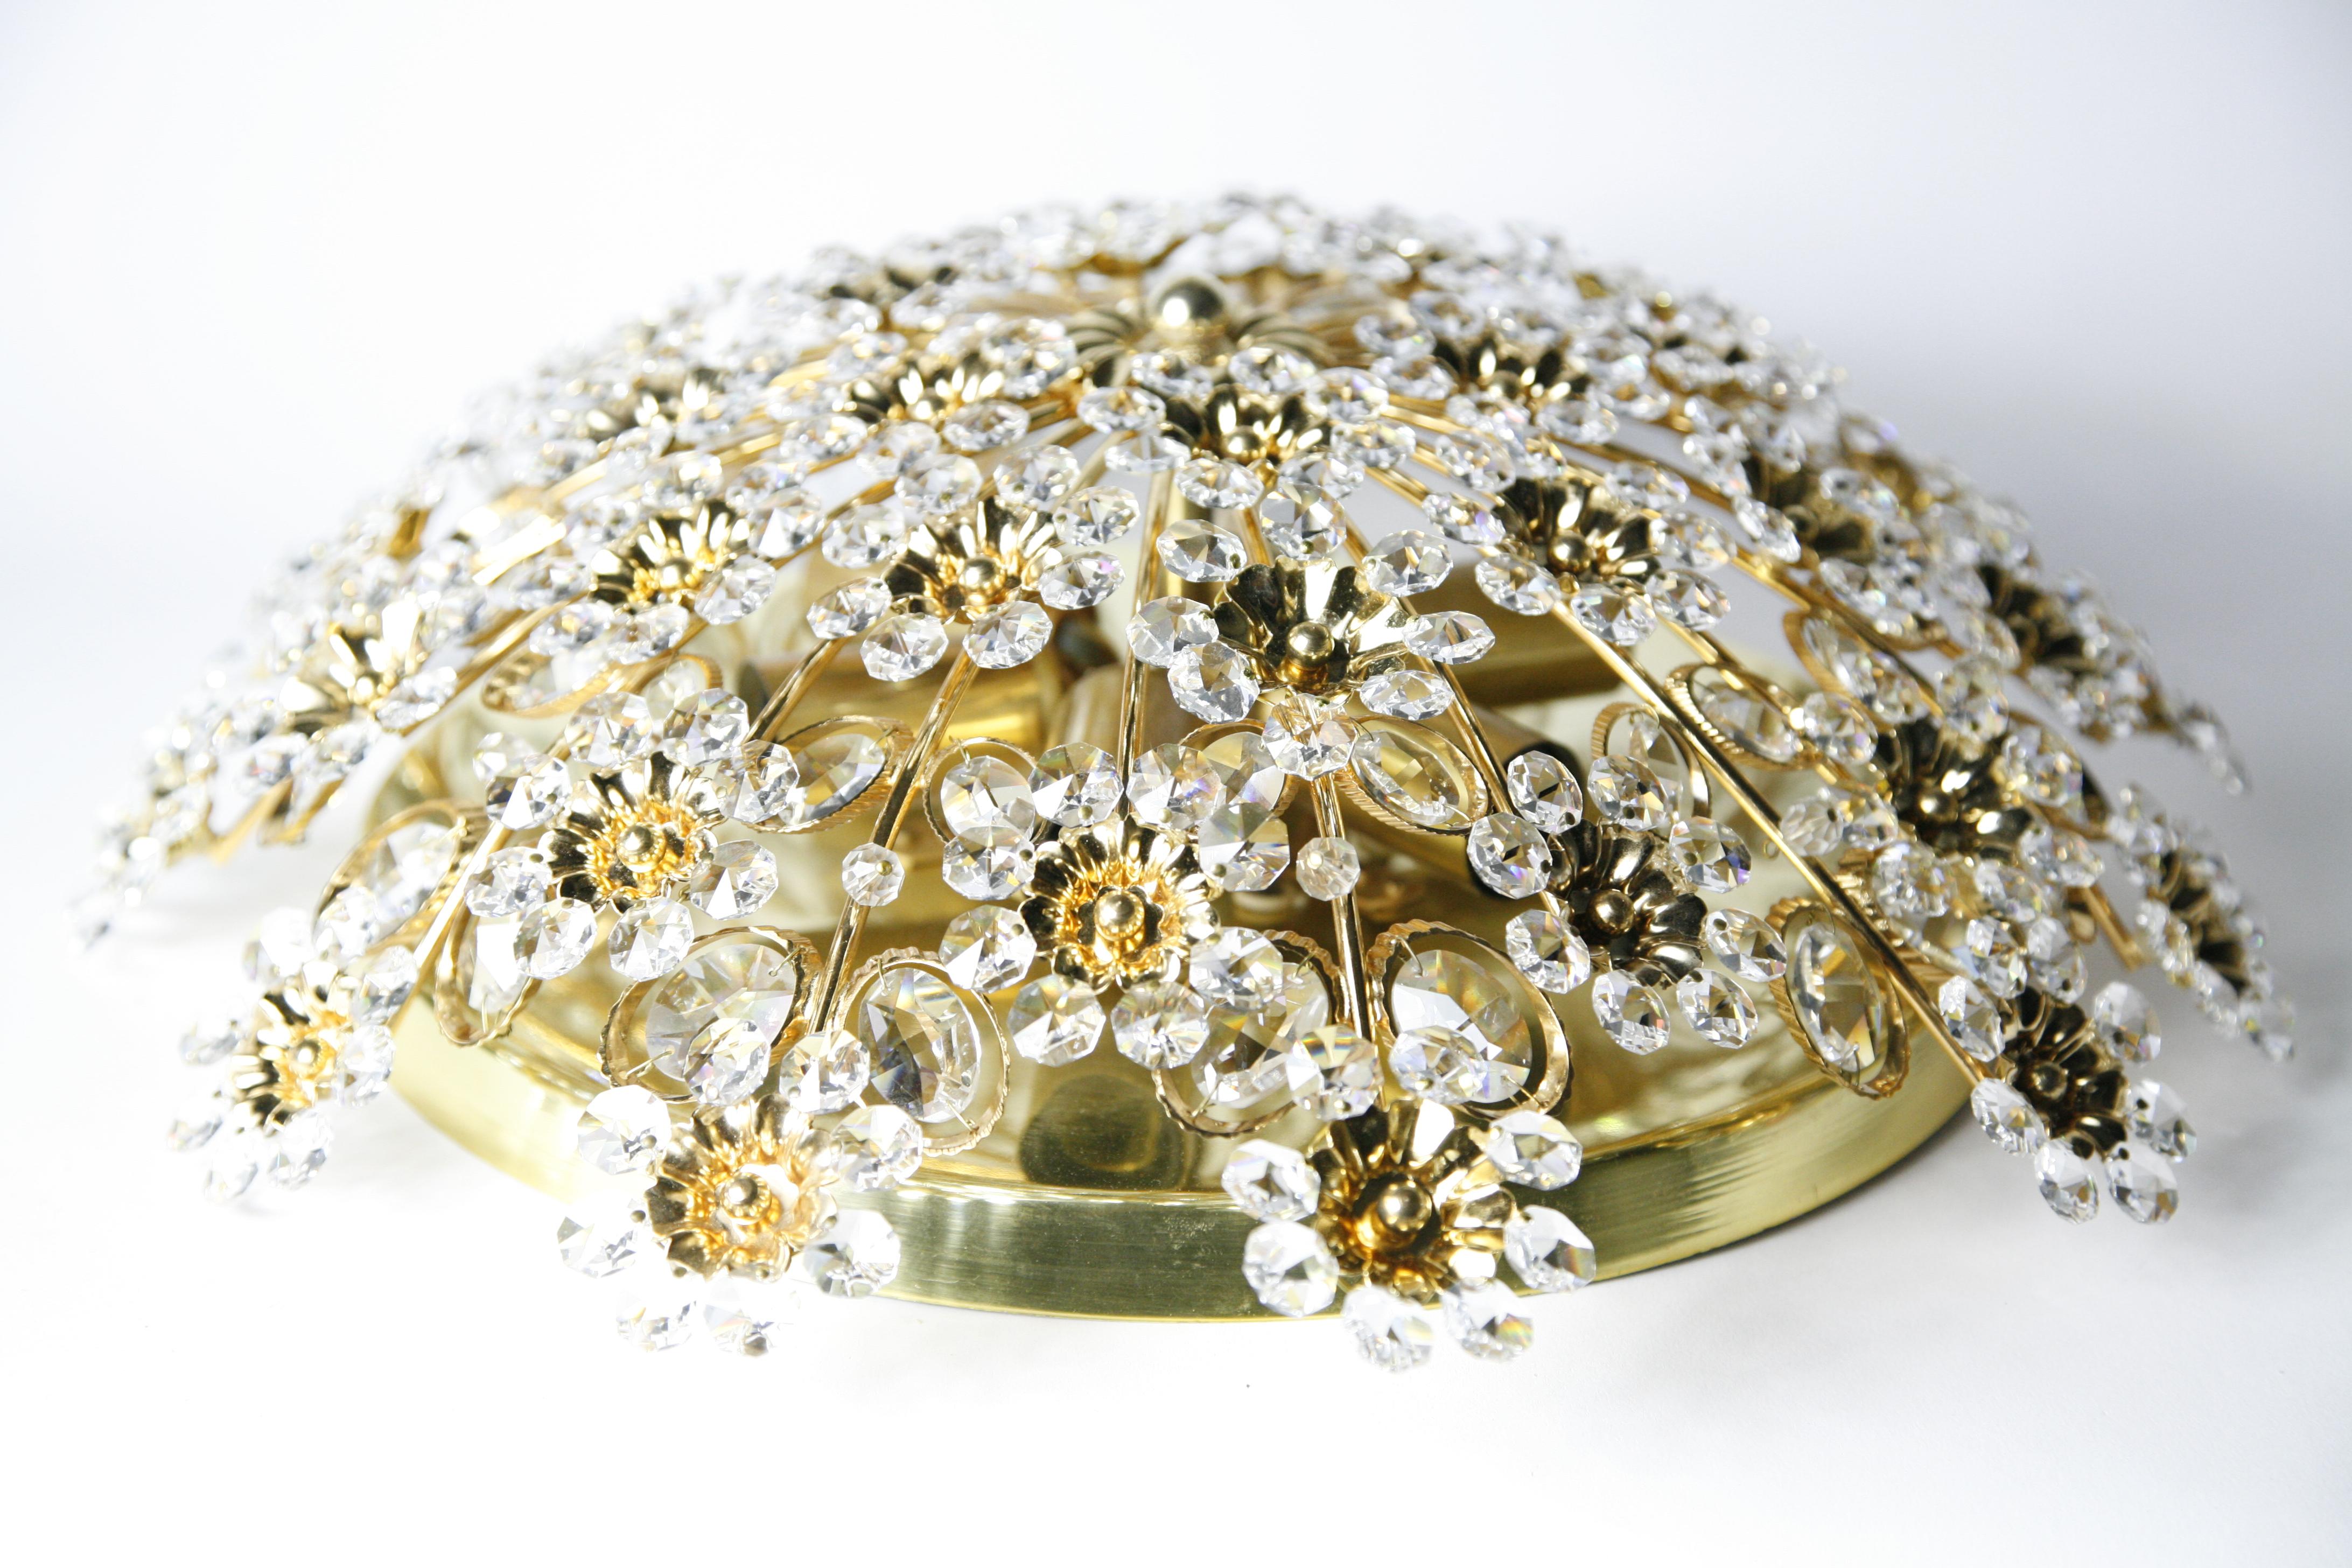 1970s round flush mount  gilded frame that has numerous cut crystals and beads in various sizes in the placed in shapes of flowers , Austria.
Six European candelabra sockets.

Signed and numbered Christoph Palme, Palwa.